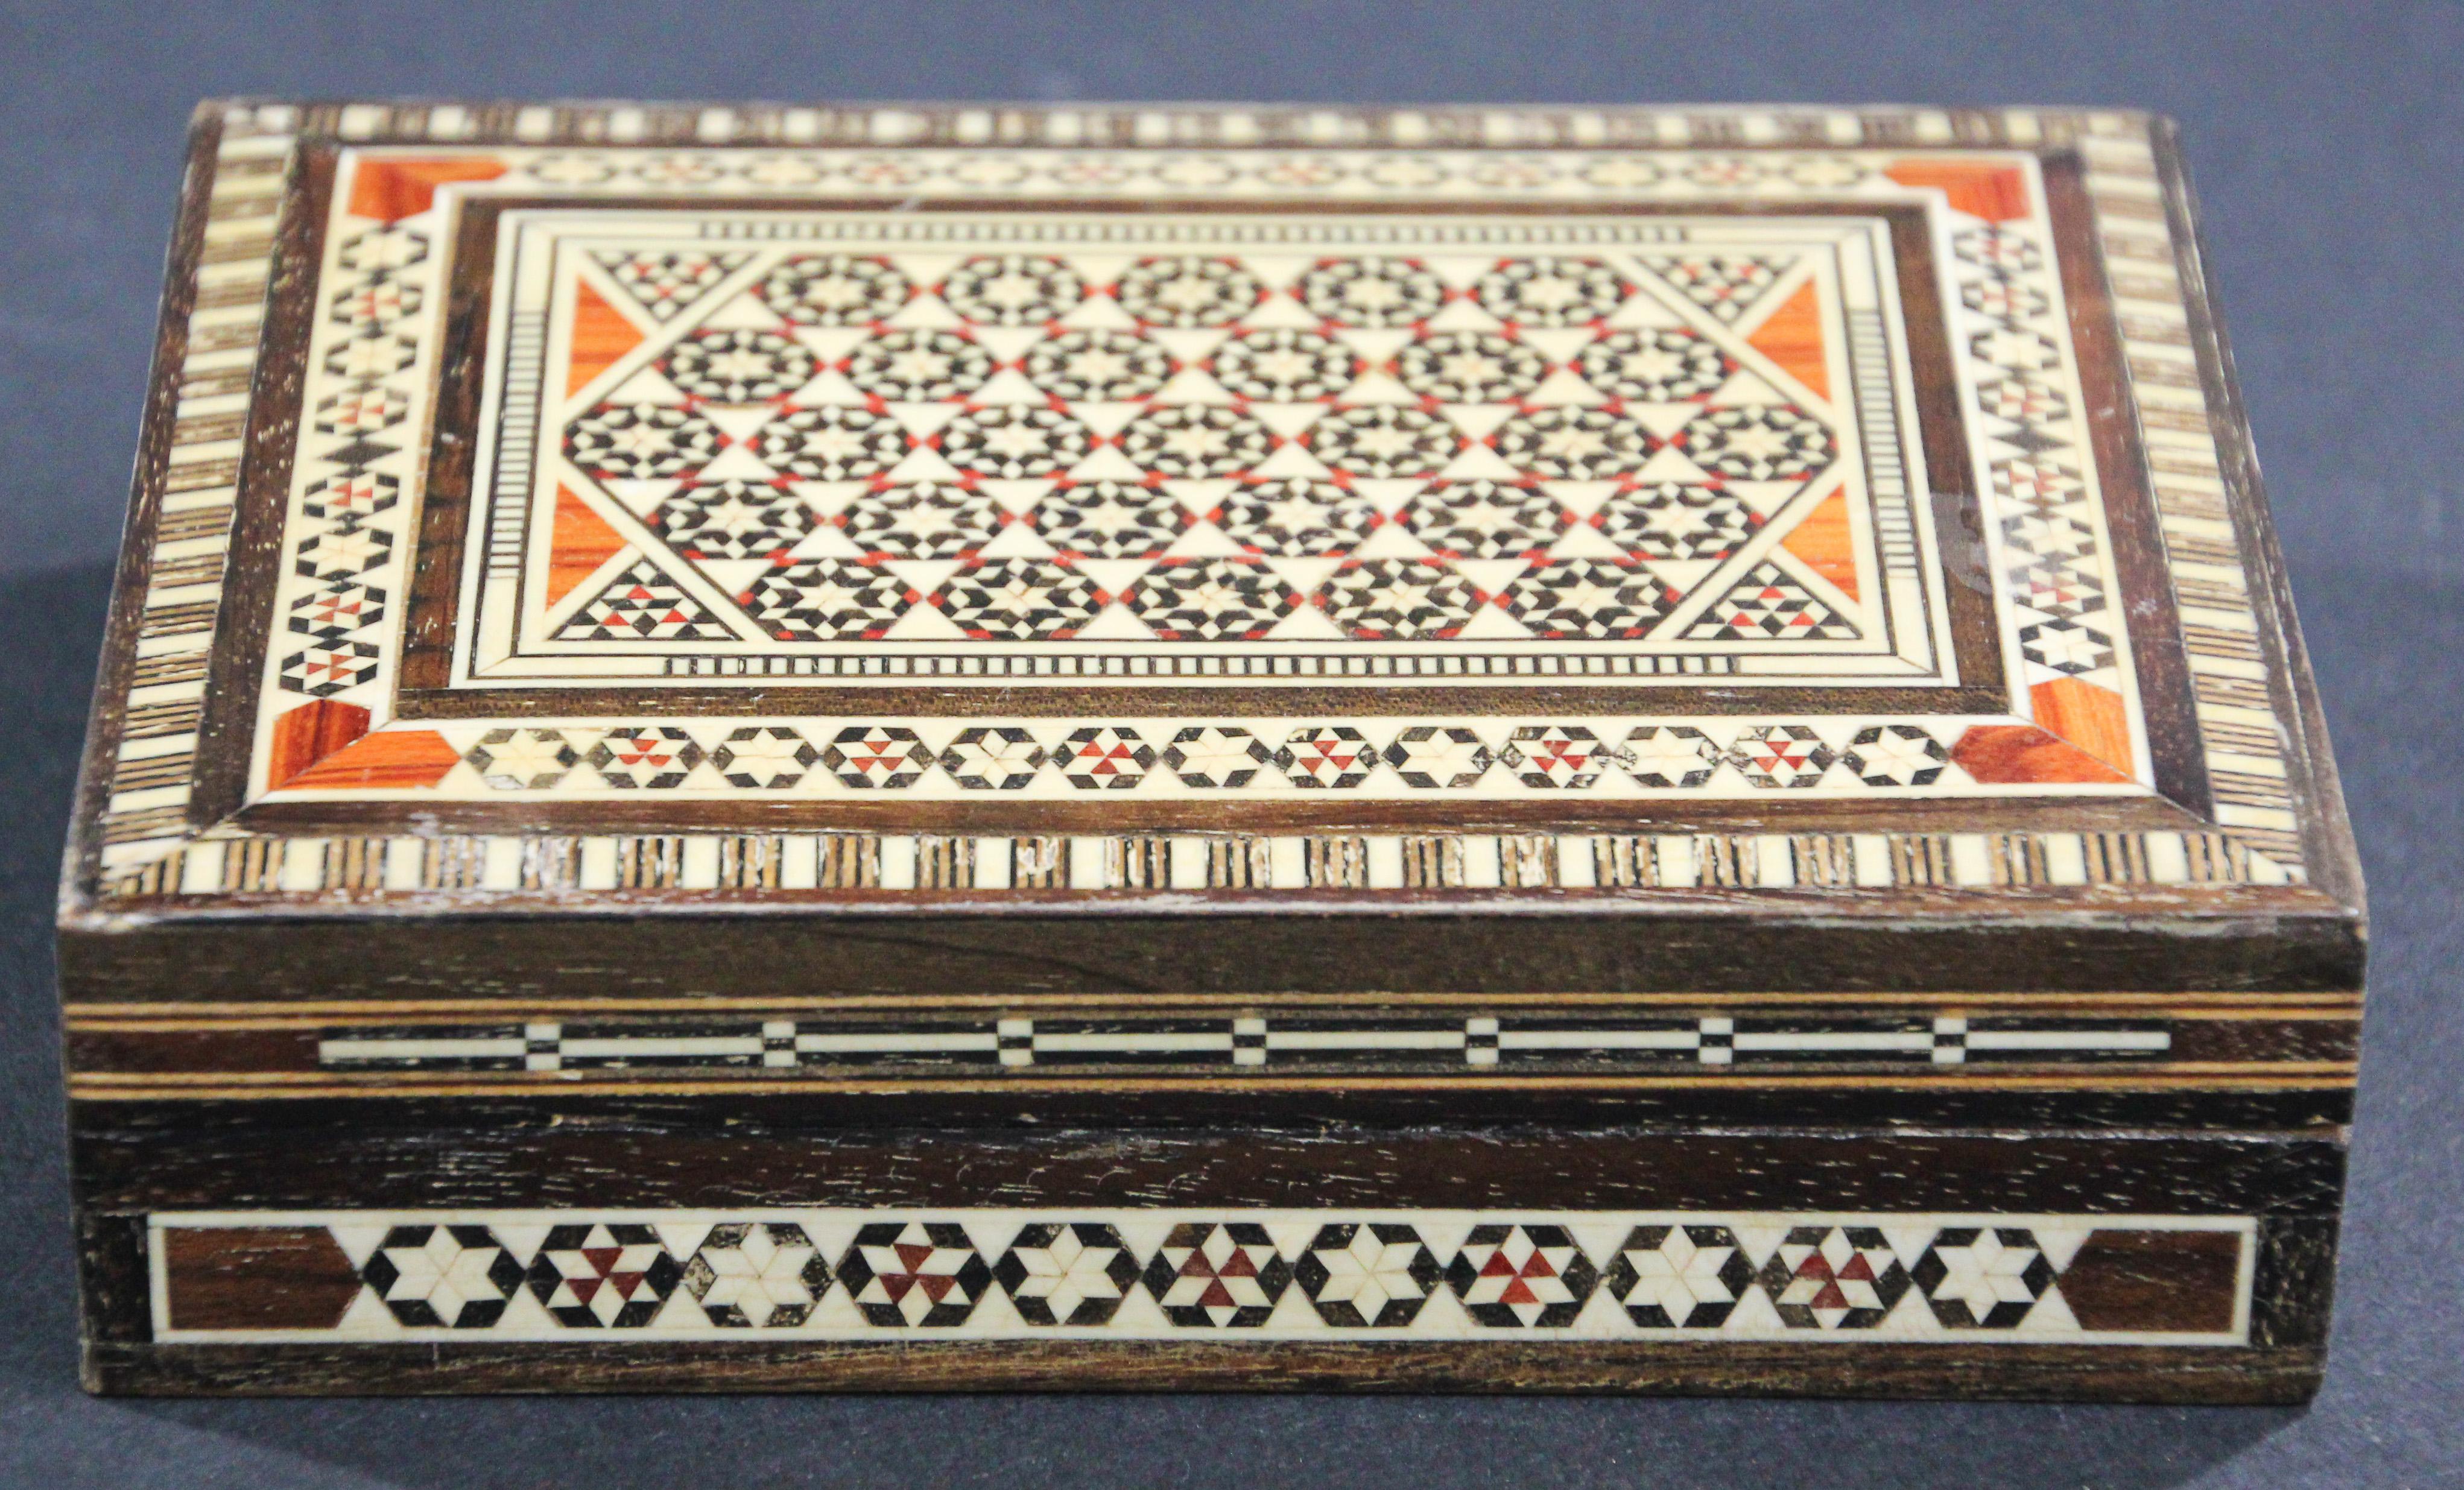 Exquisite handcrafted Middle Eastern mosaic marquetry inlaid walnut wood box.
vintage small trinket box intricately decorated with Moorish motif designs which have been painstakingly inlaid with mosaic marquetry, mother of pearl and